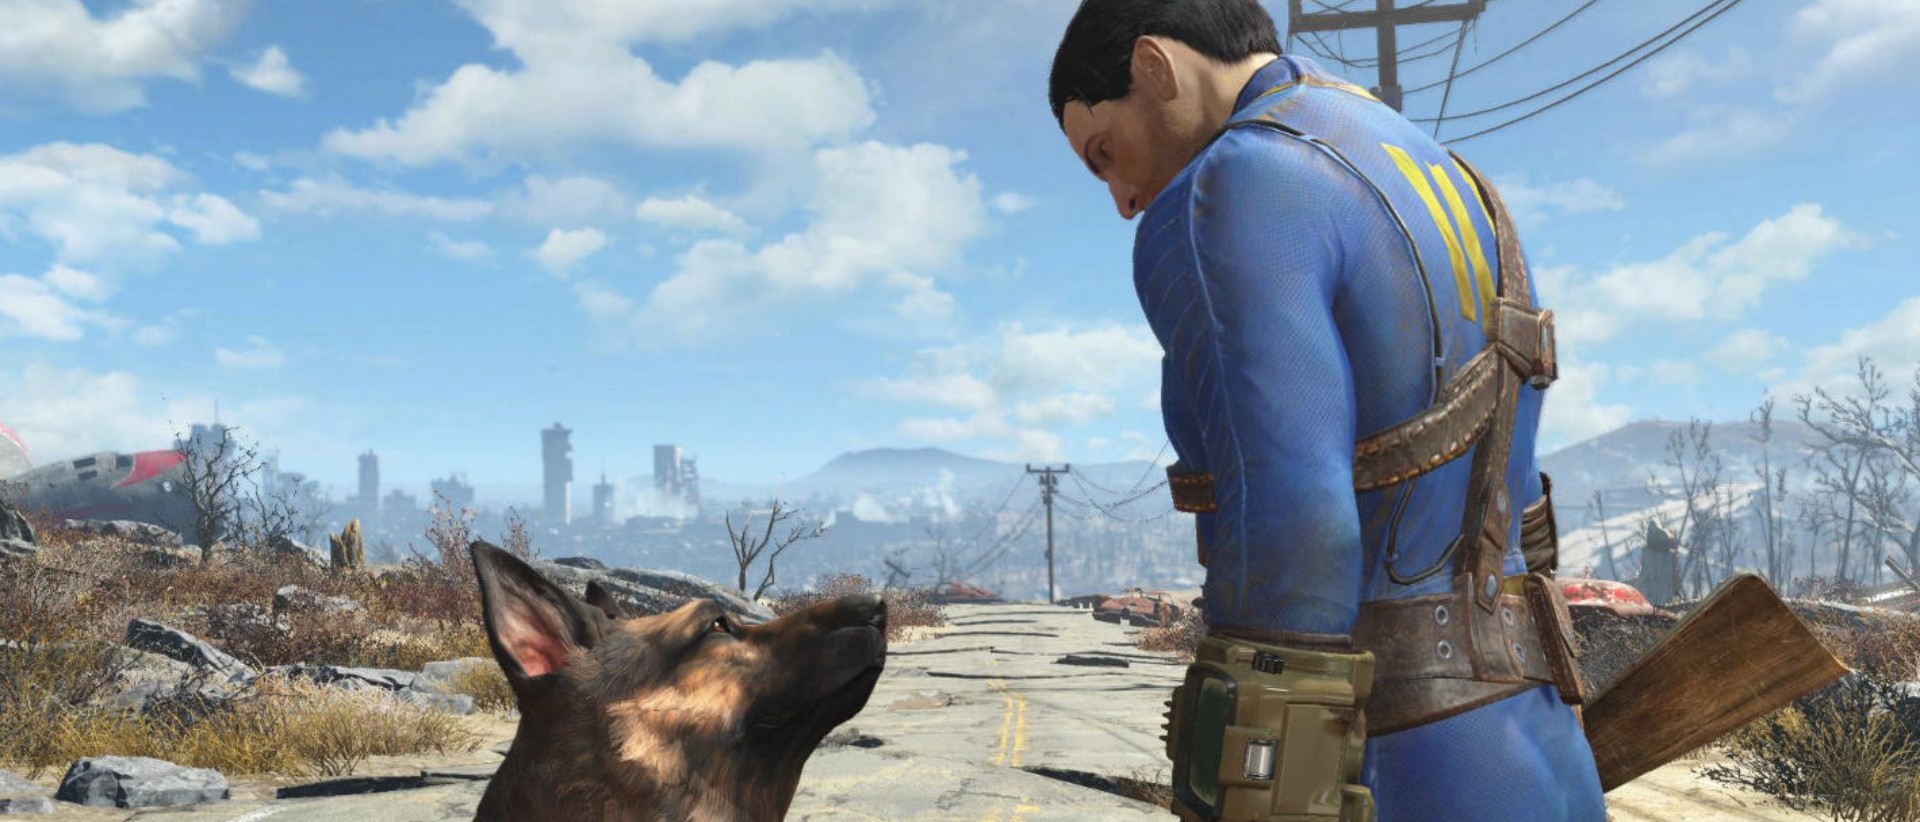 New Vegas Or Fallout 4: Which Fallout Is Best For You & Why